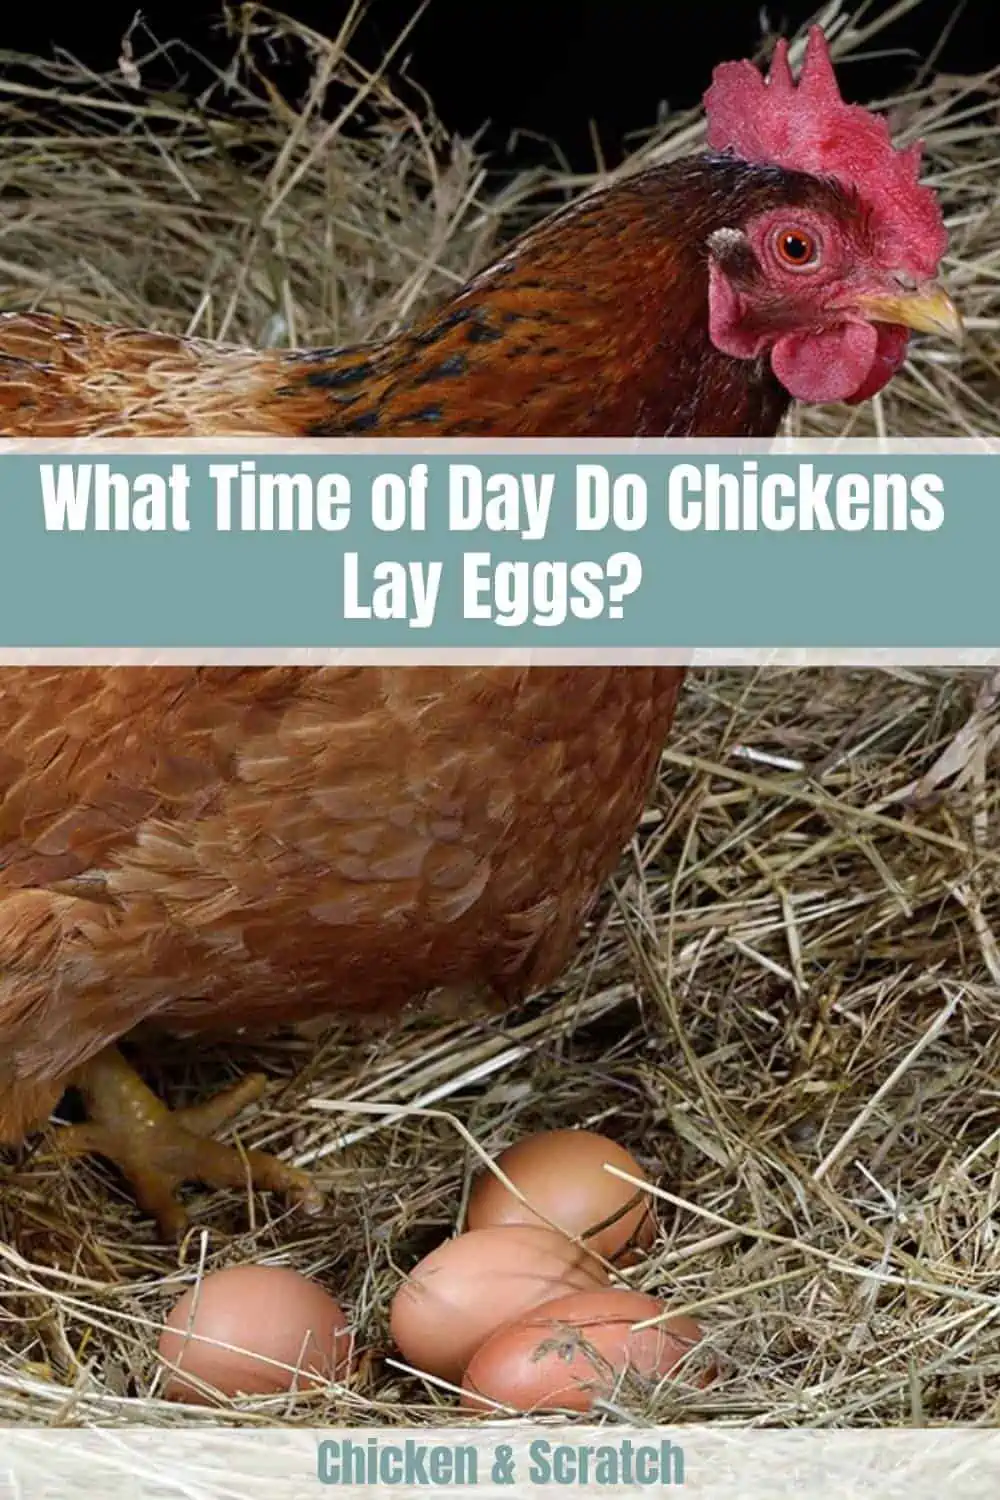 Is It Painful For Chickens To Lay Eggs?